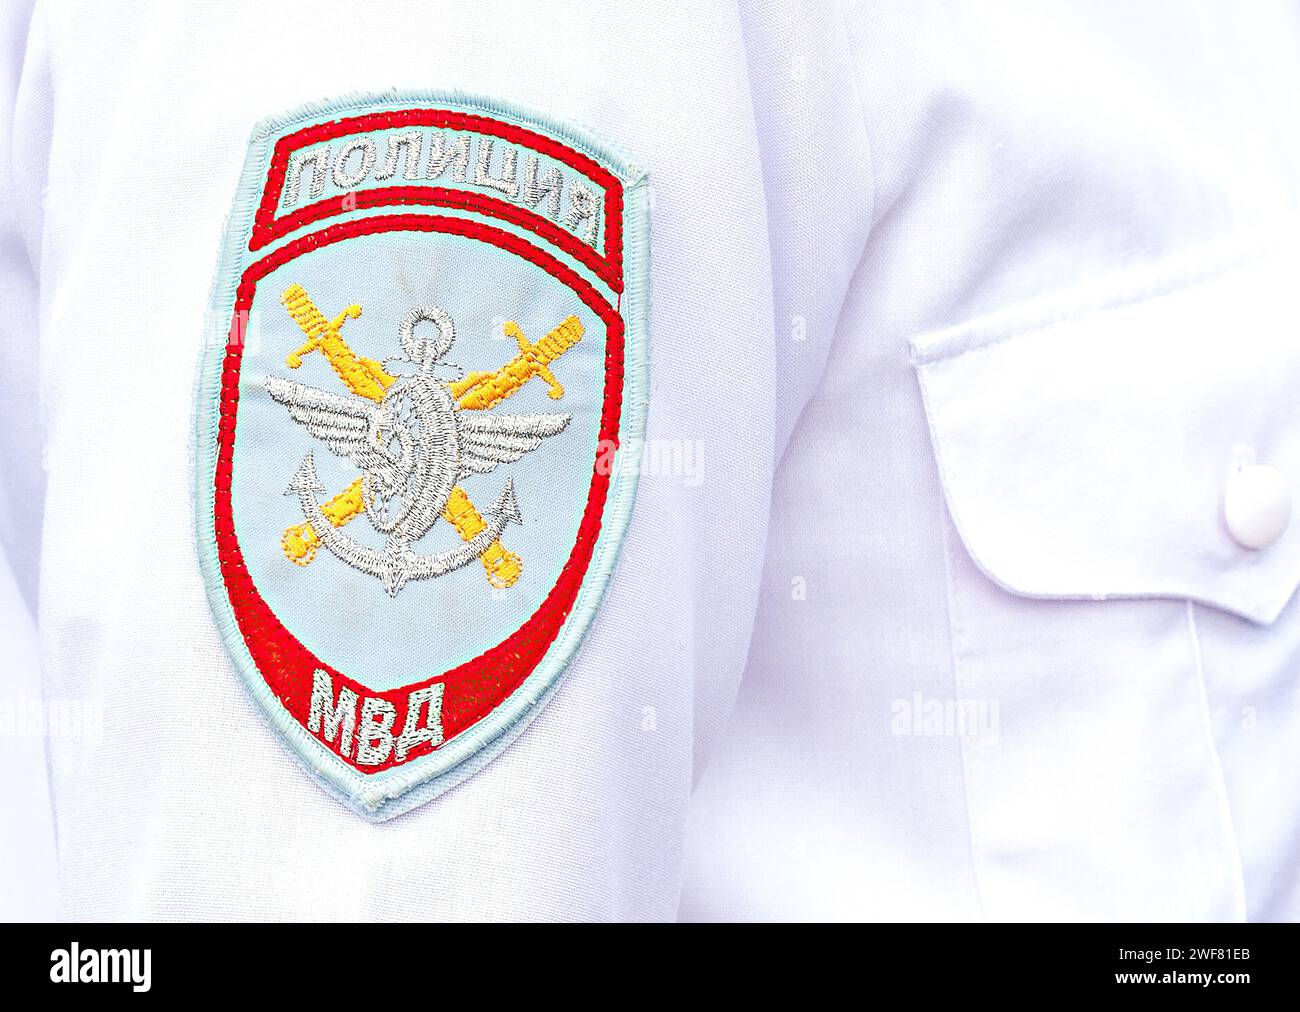 Samara, Russia - May 1, 2015: Sleeve chevron on the uniforms of the russian police.  Russian transport police Stock Photo